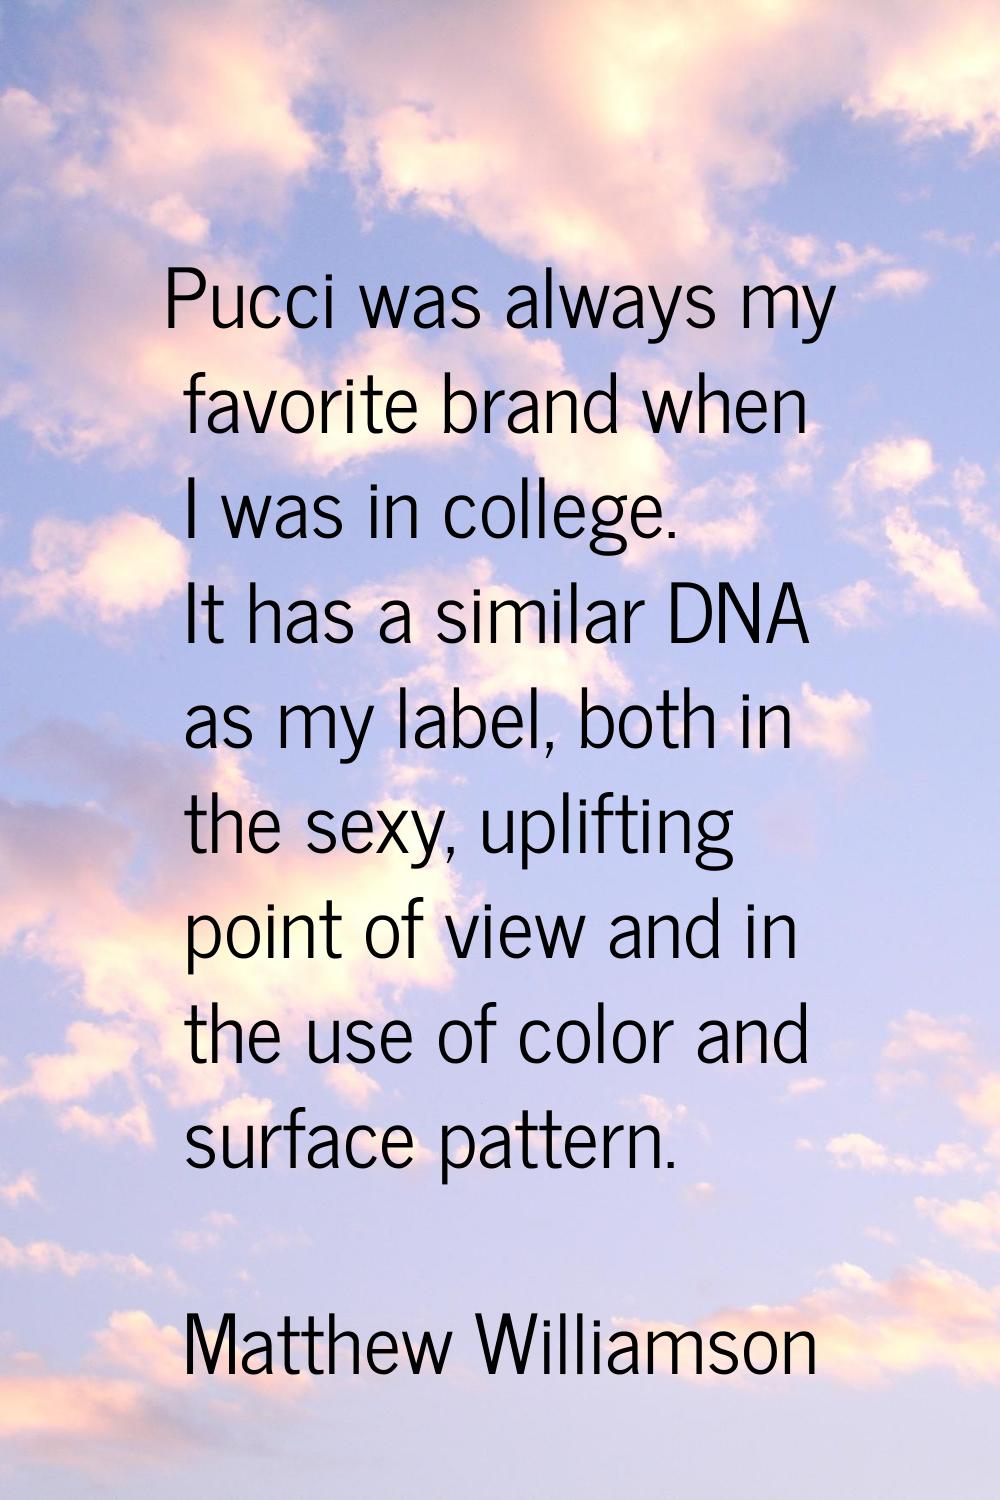 Pucci was always my favorite brand when I was in college. It has a similar DNA as my label, both in